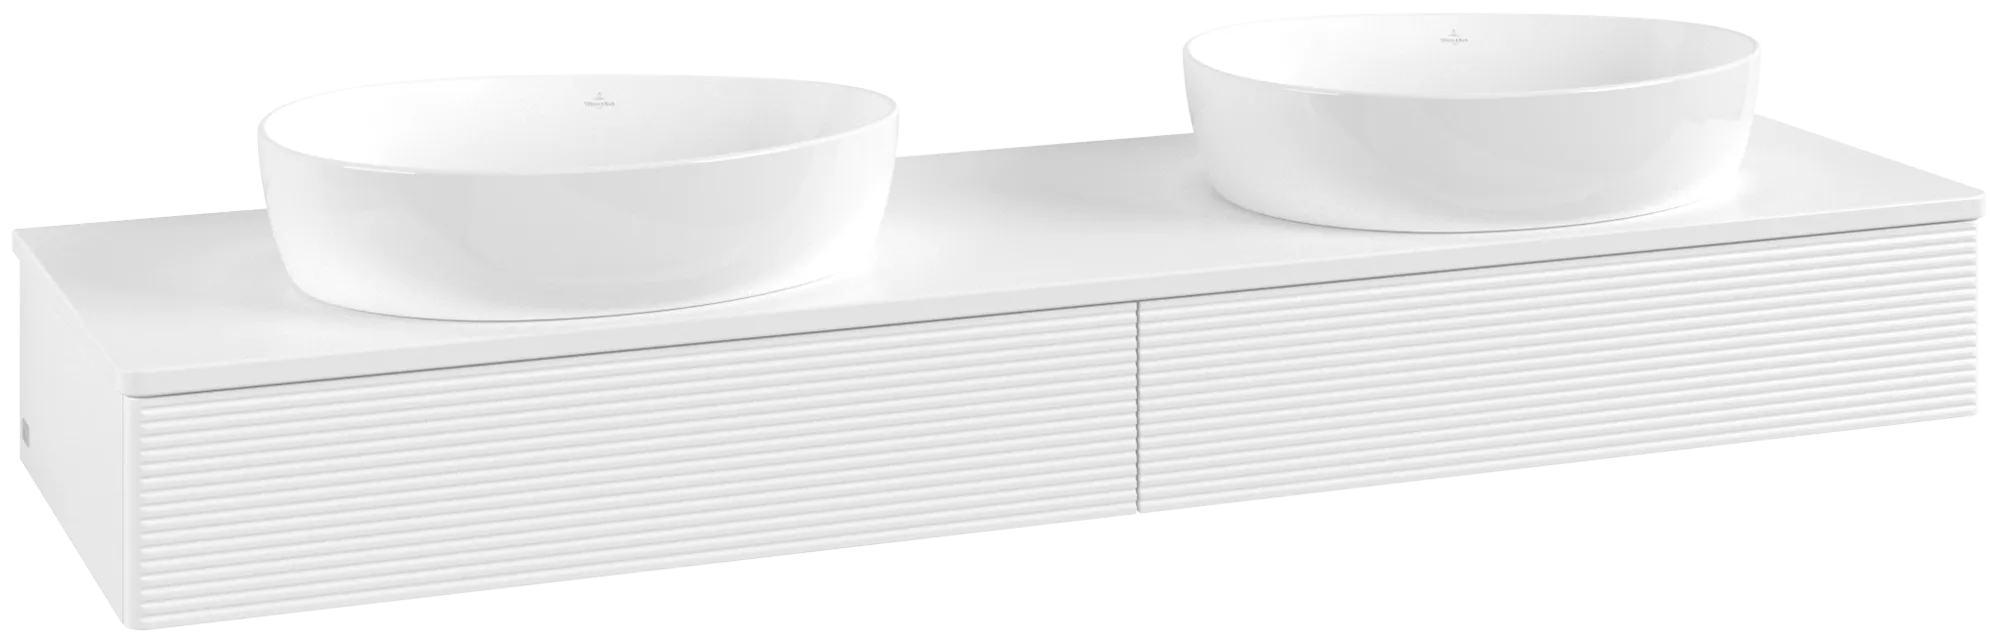 Picture of VILLEROY BOCH Antao Vanity unit, with lighting, 2 pull-out compartments, 1600 x 190 x 500 mm, Front with grain texture, White Matt Lacquer / White Matt Lacquer #L17150MT